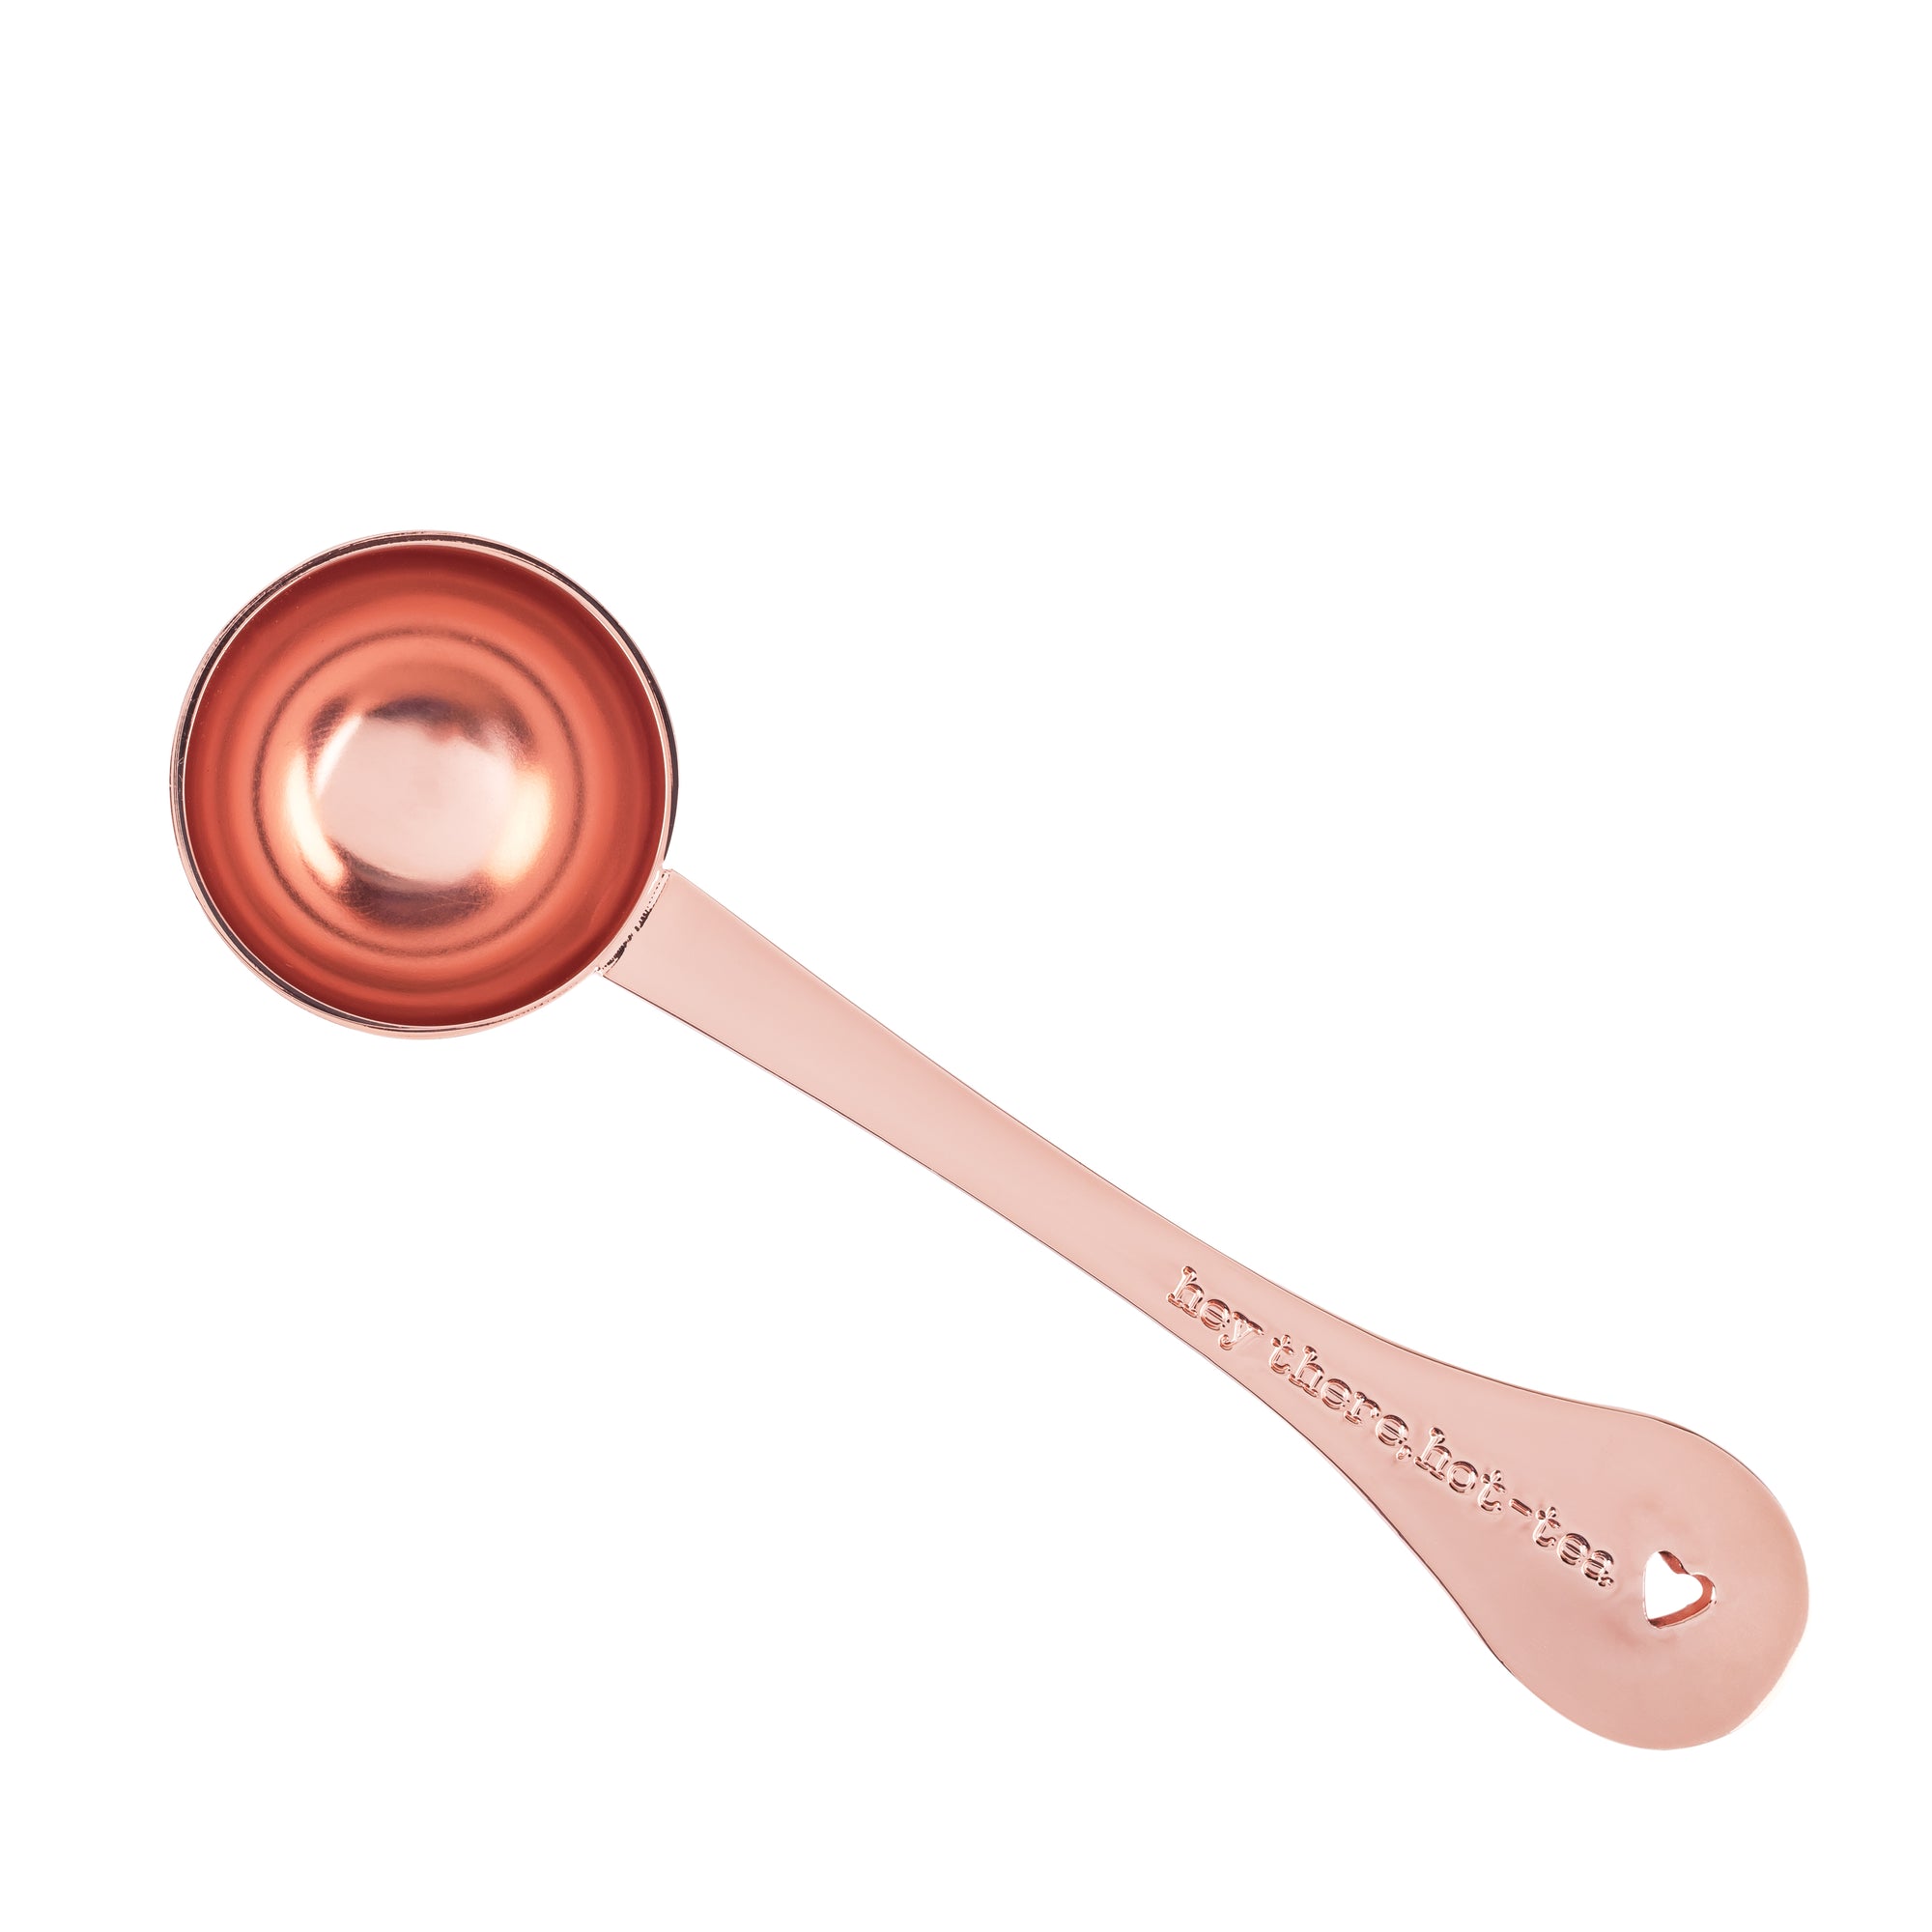 Hey There, Measuring Spoon